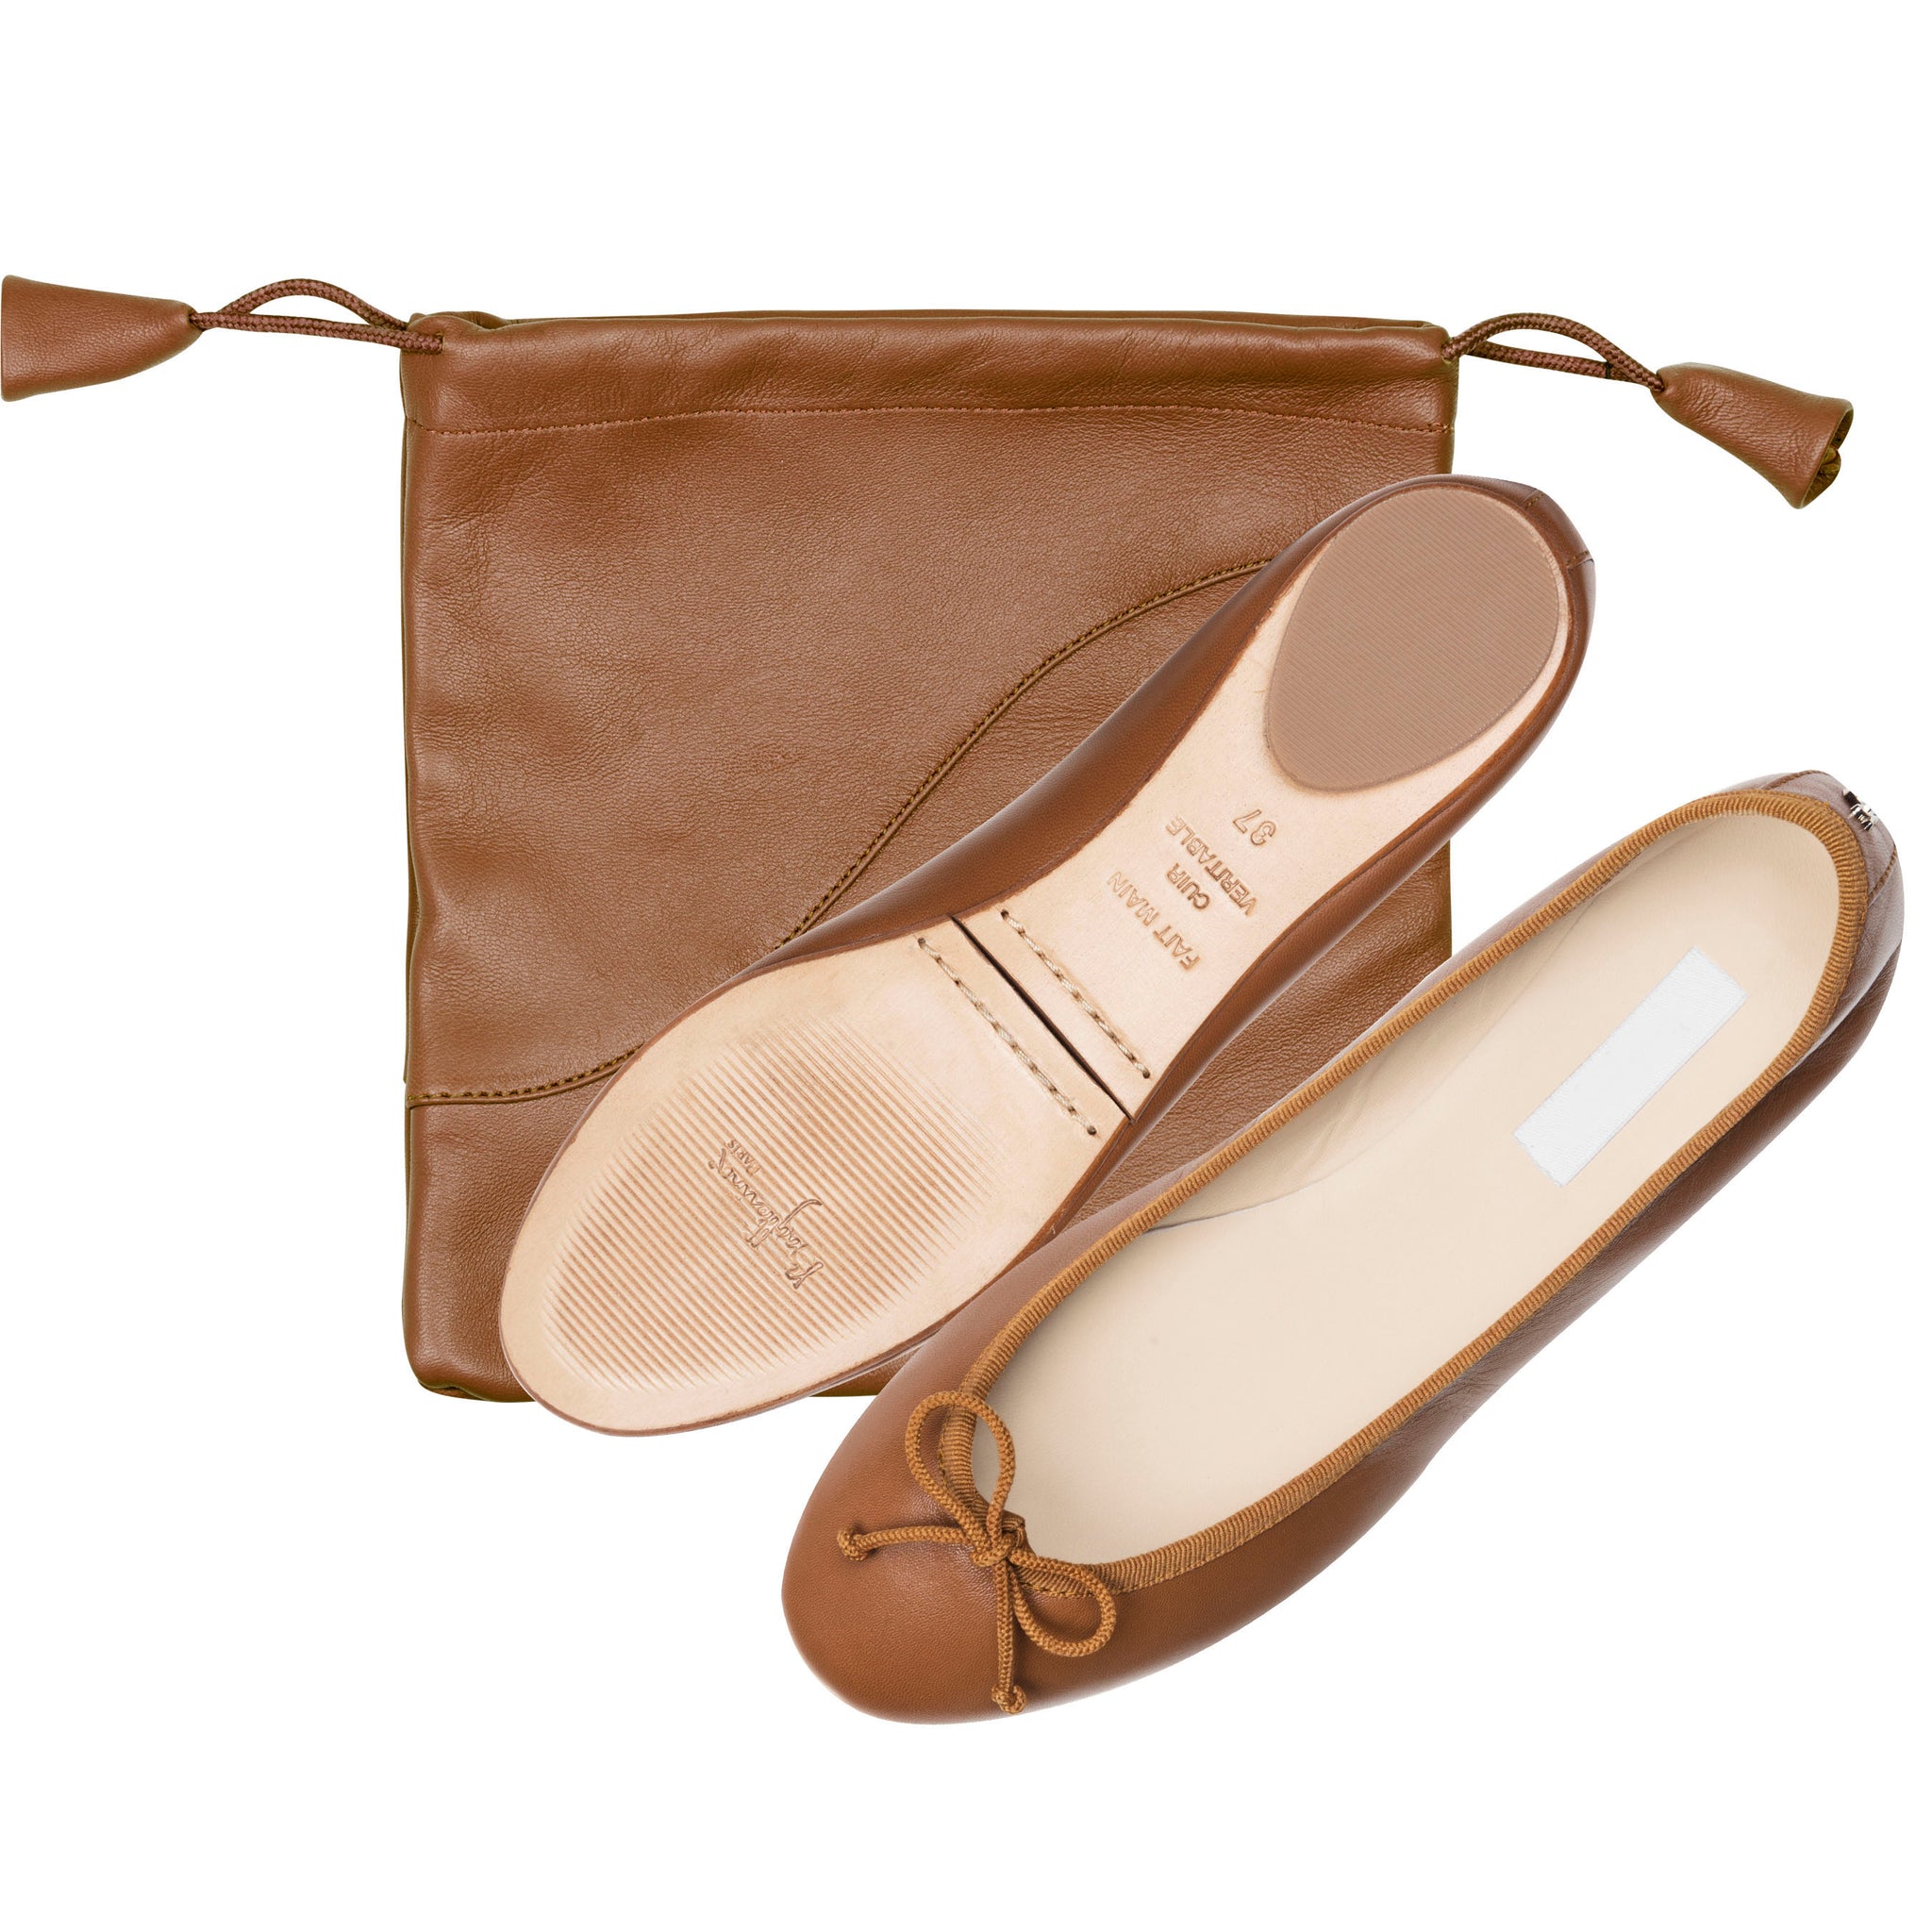 Ballet Pumps Light Brown with Carry Bag